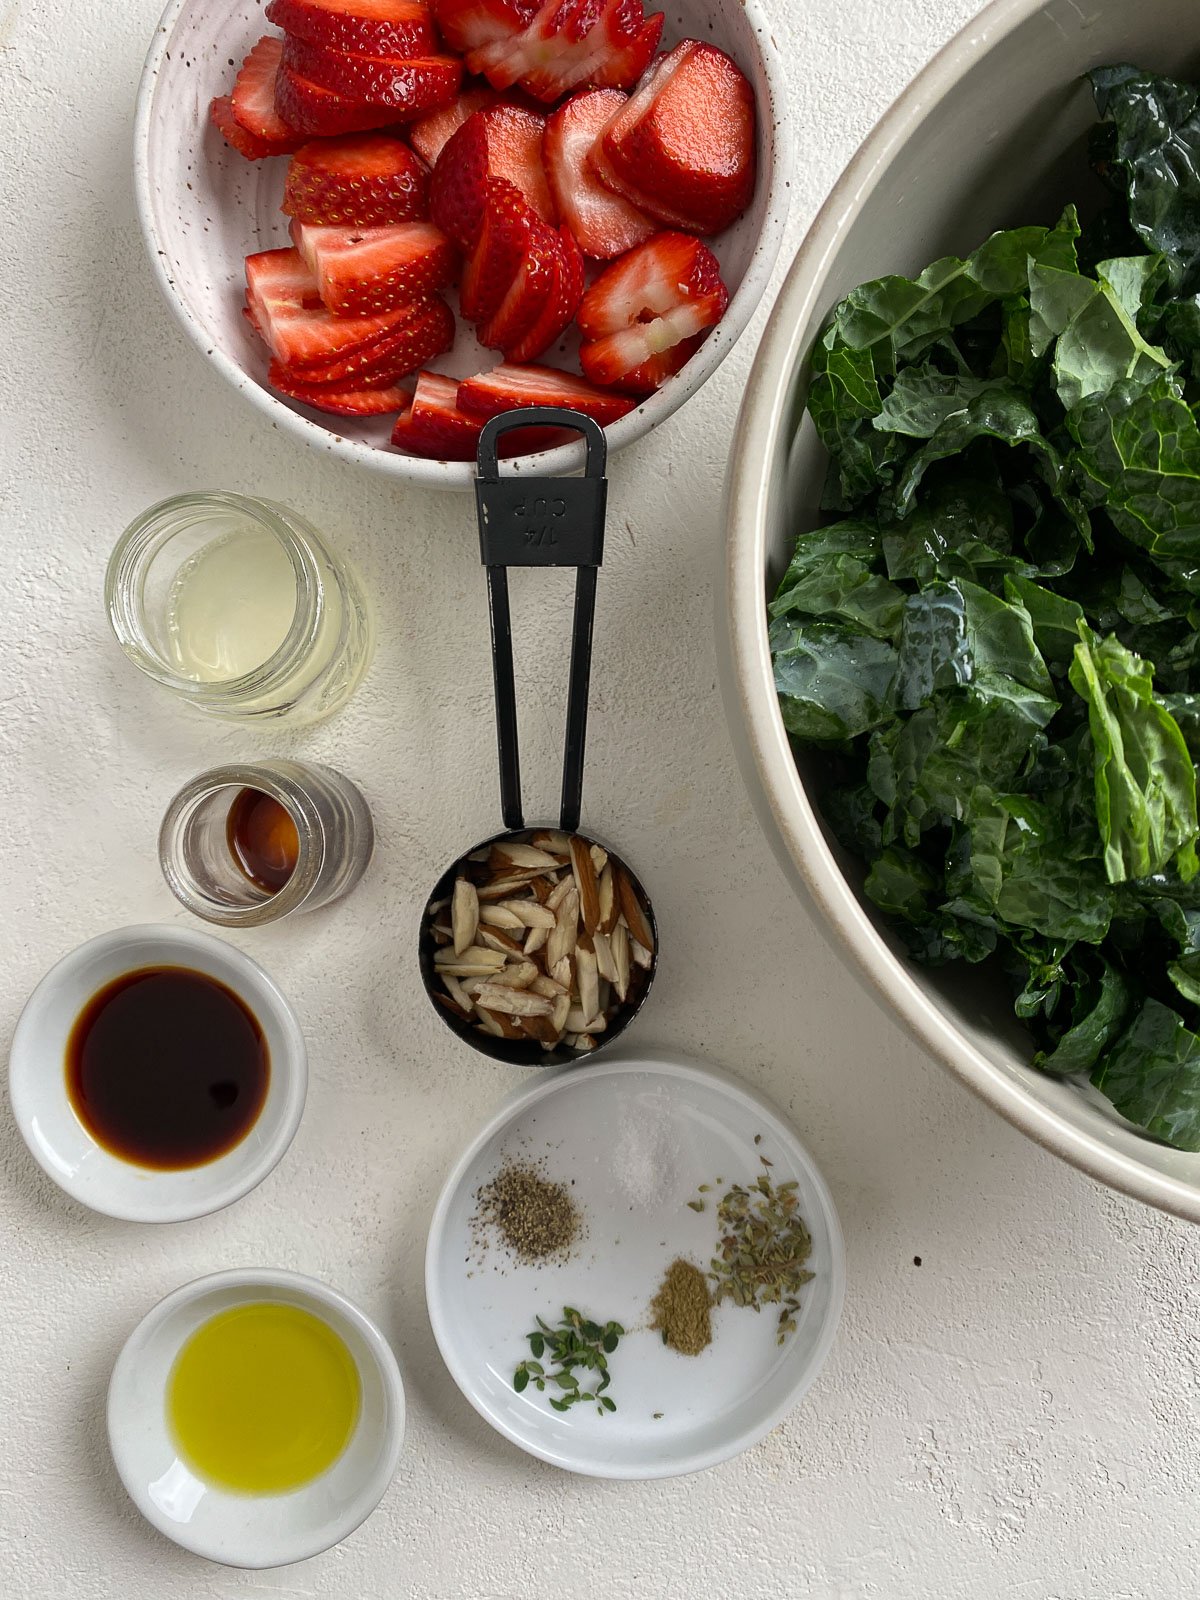 ingredients for Strawberry Kale Salad measured out against a light surface